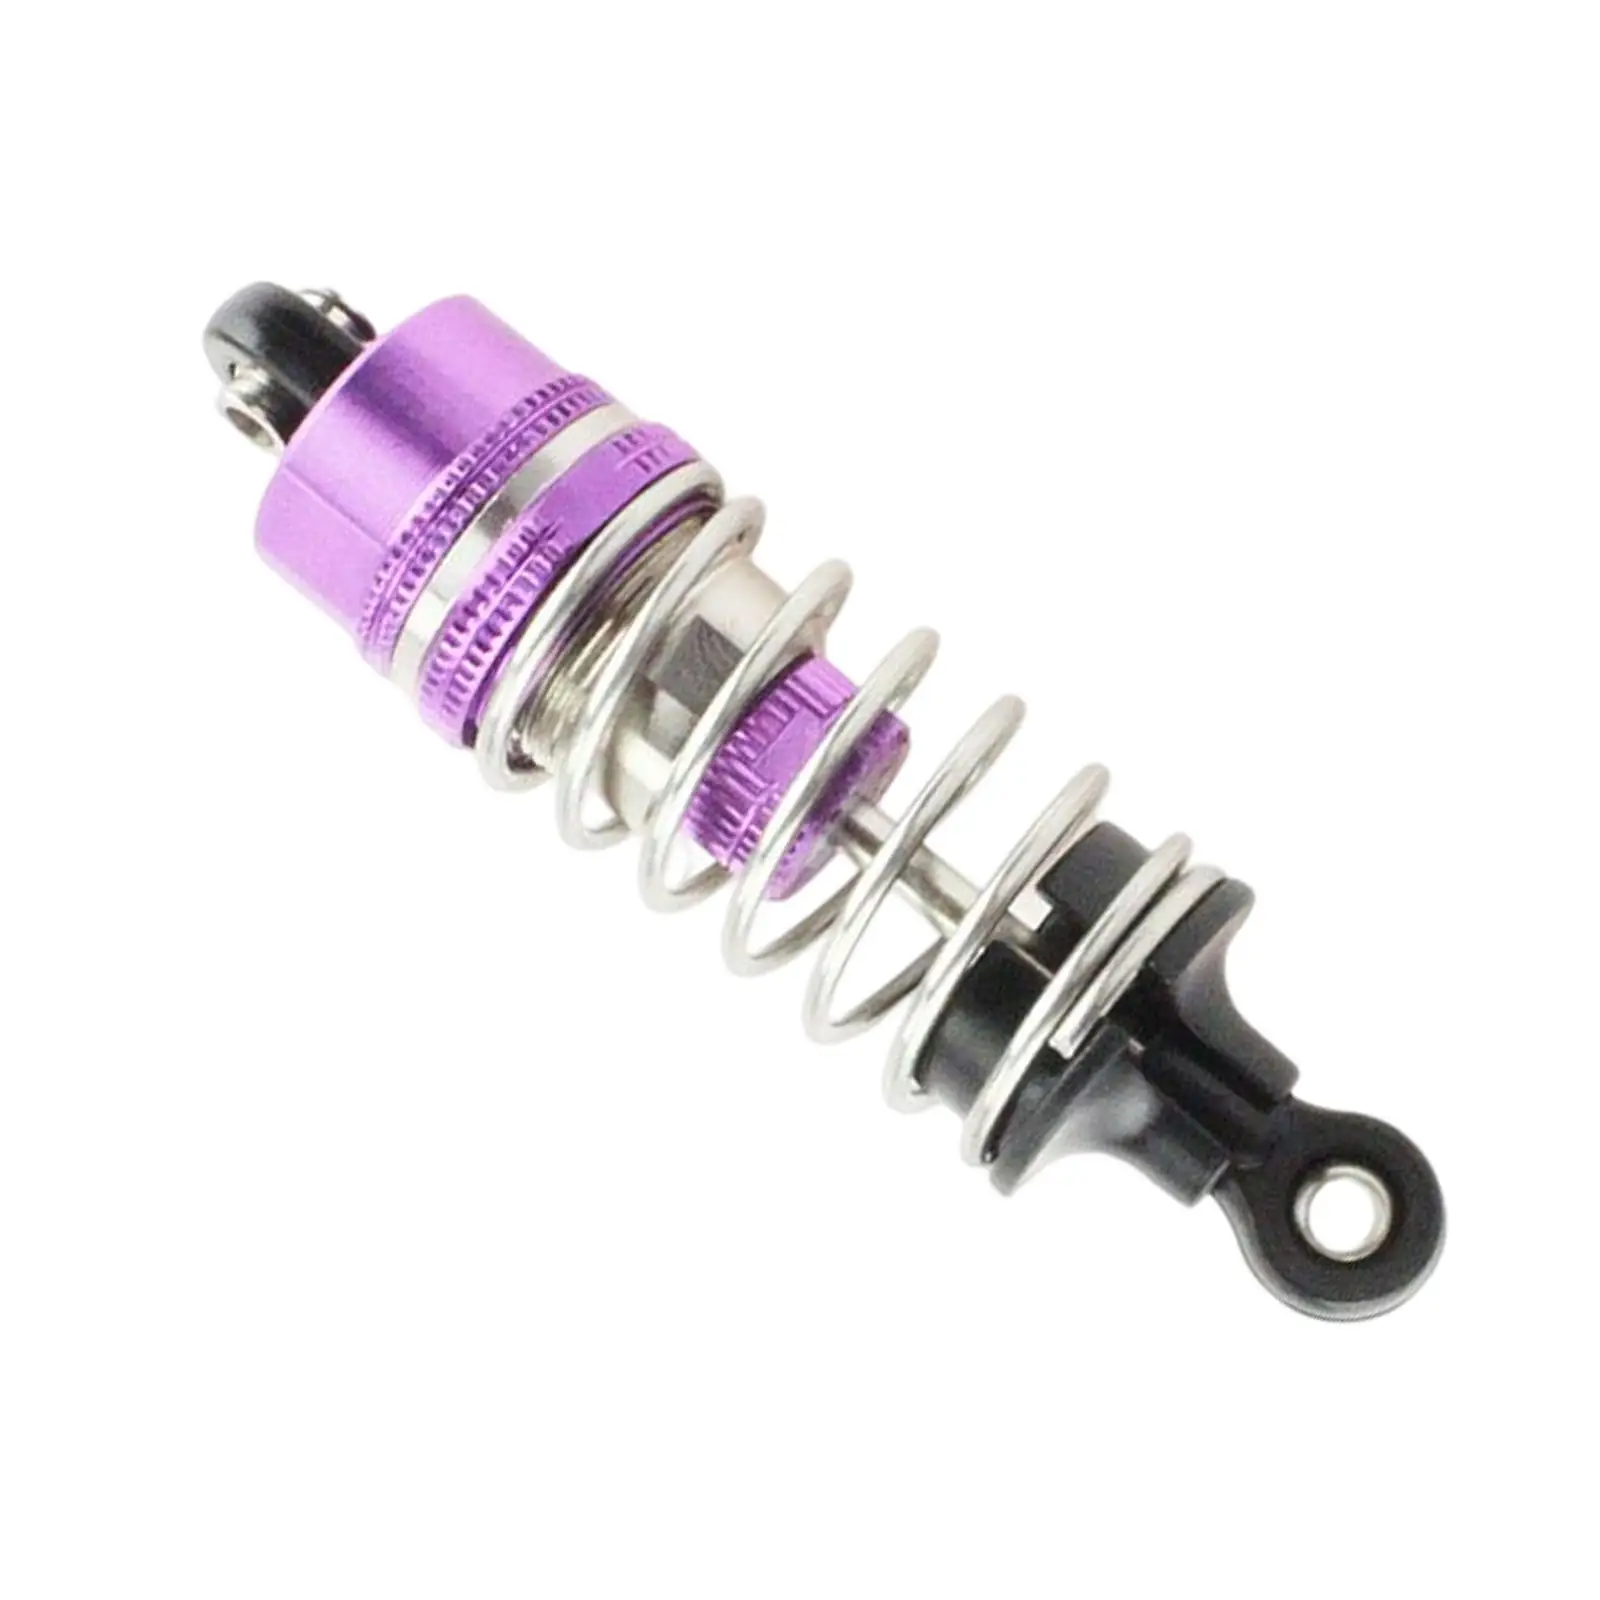 Upgrade Rear Shock Absorber Metal Parts Replacement for Truck Crawler RC Car